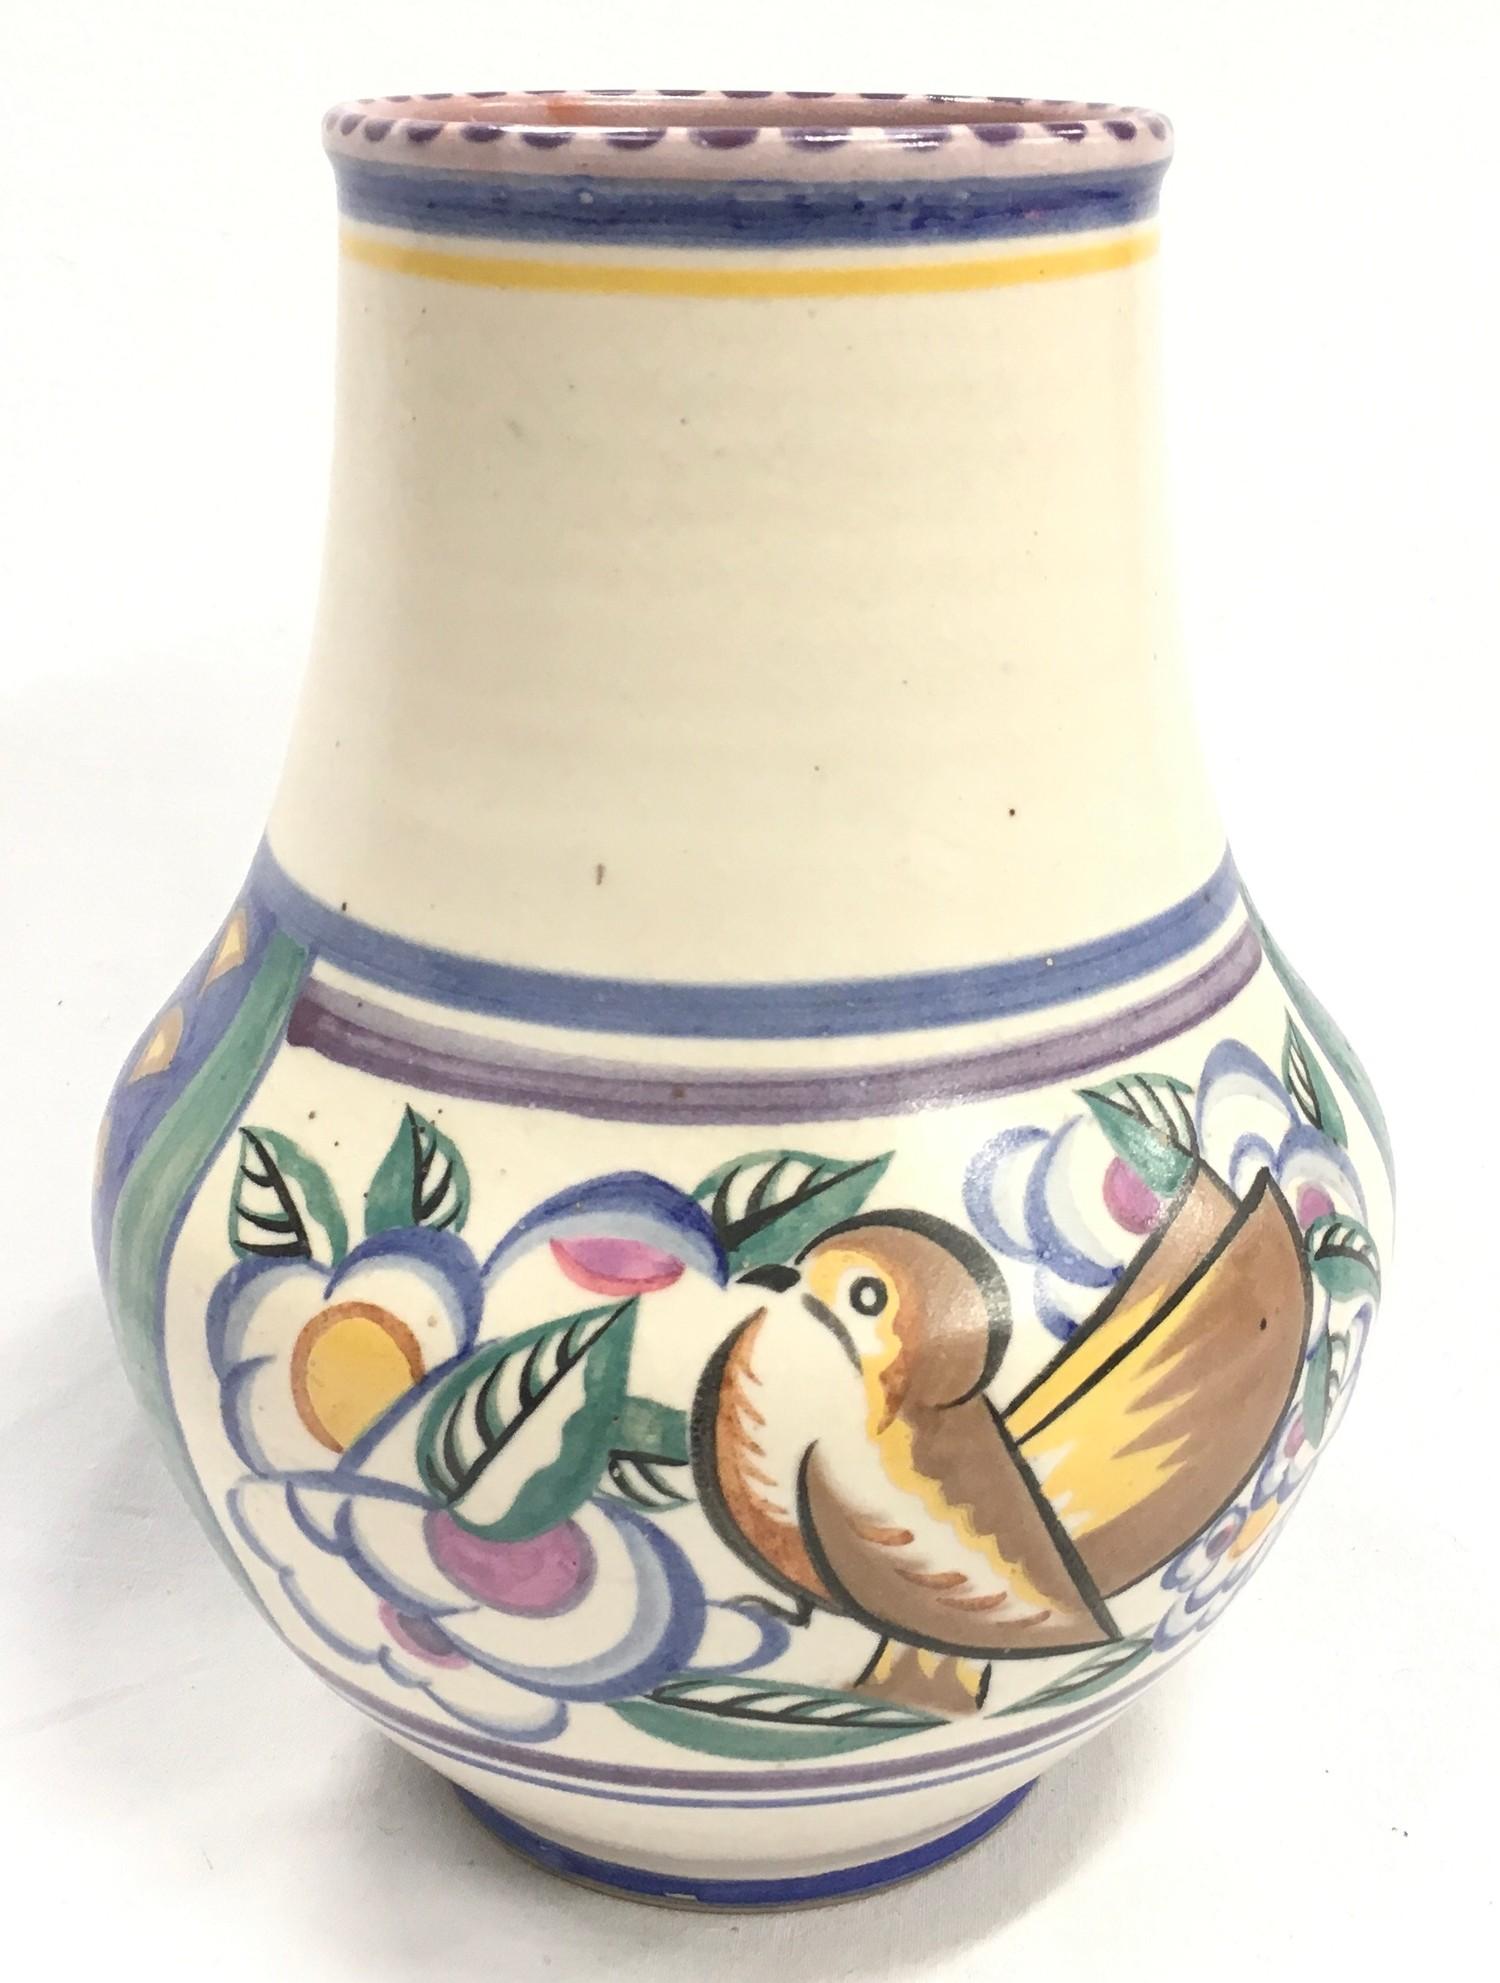 Poole Pottery Carter Stabler Adams shape 203 ZV pattern vase by Ruth Pavely 8" high.